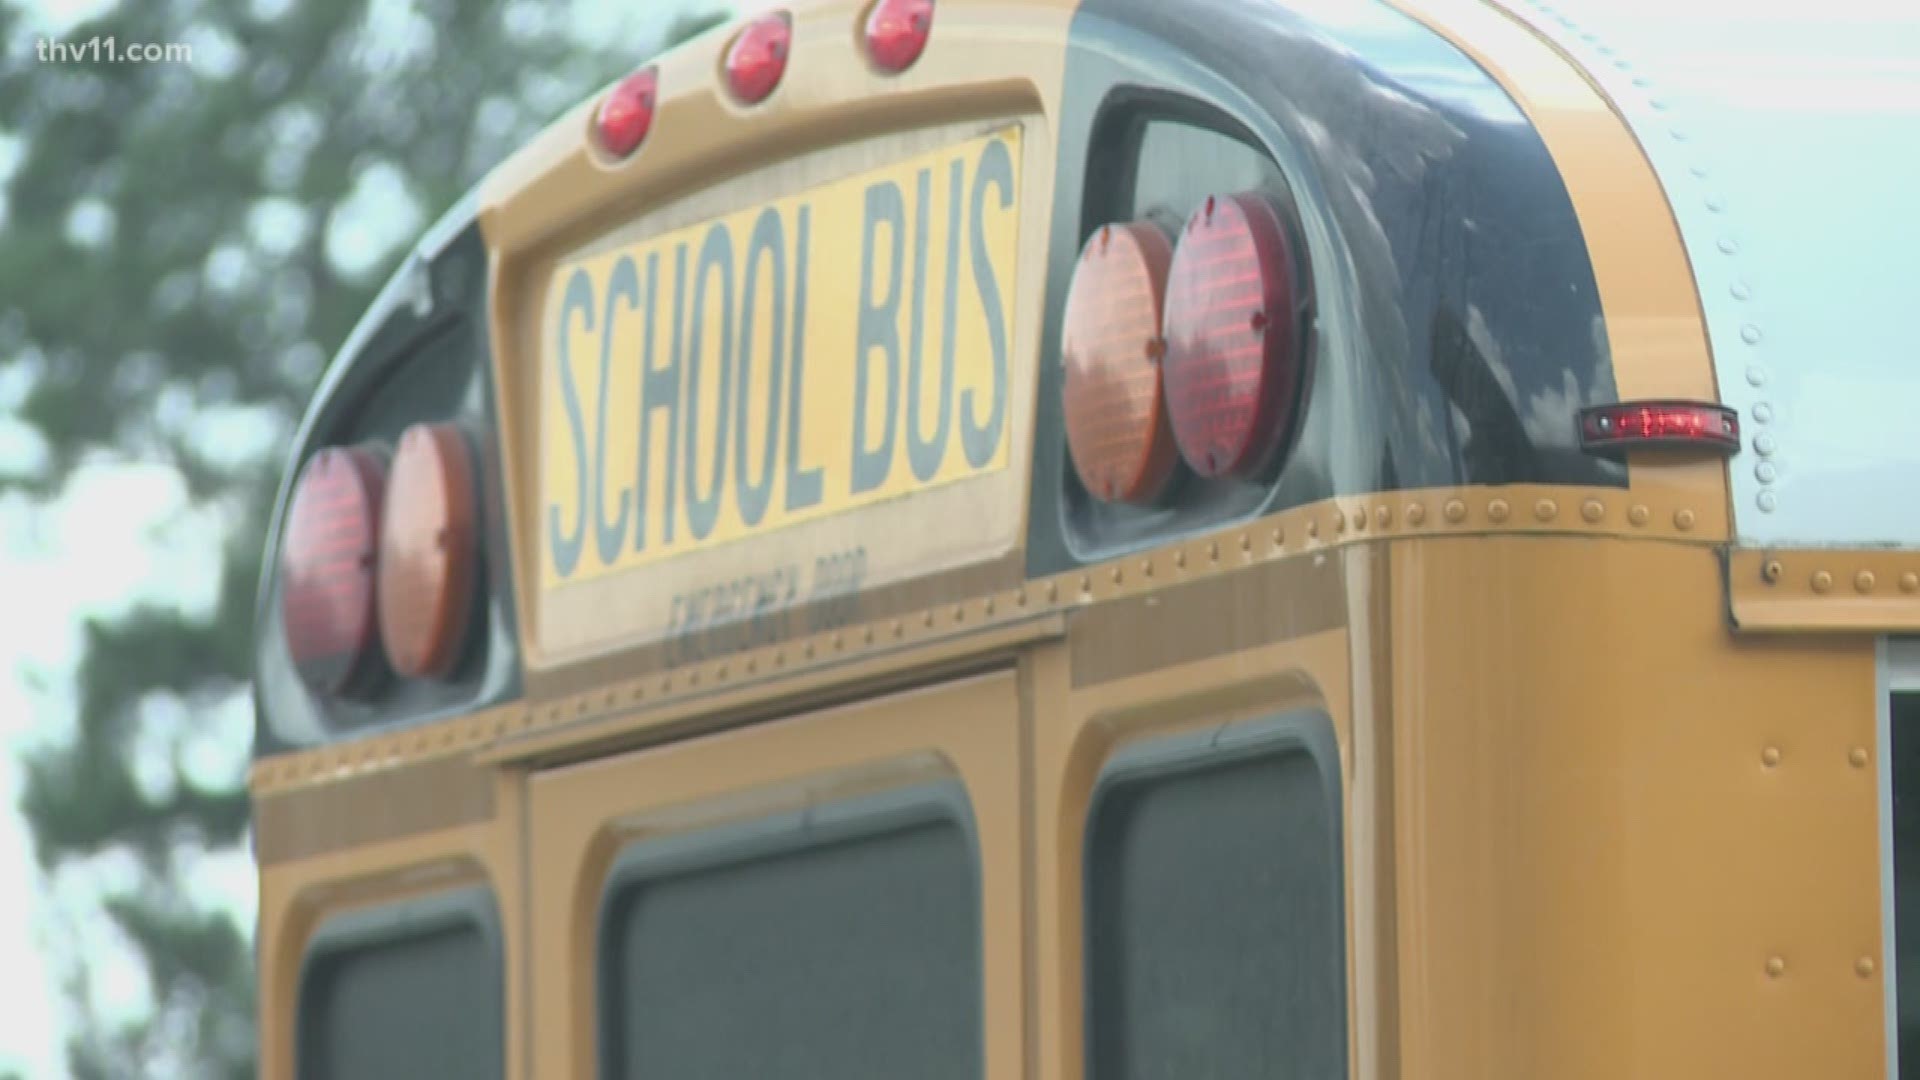 Today, a lot of learning in the classroom happens on the internet. The Pulaski County Special School District wants to make sure students can do work and projects even while riding the bus.